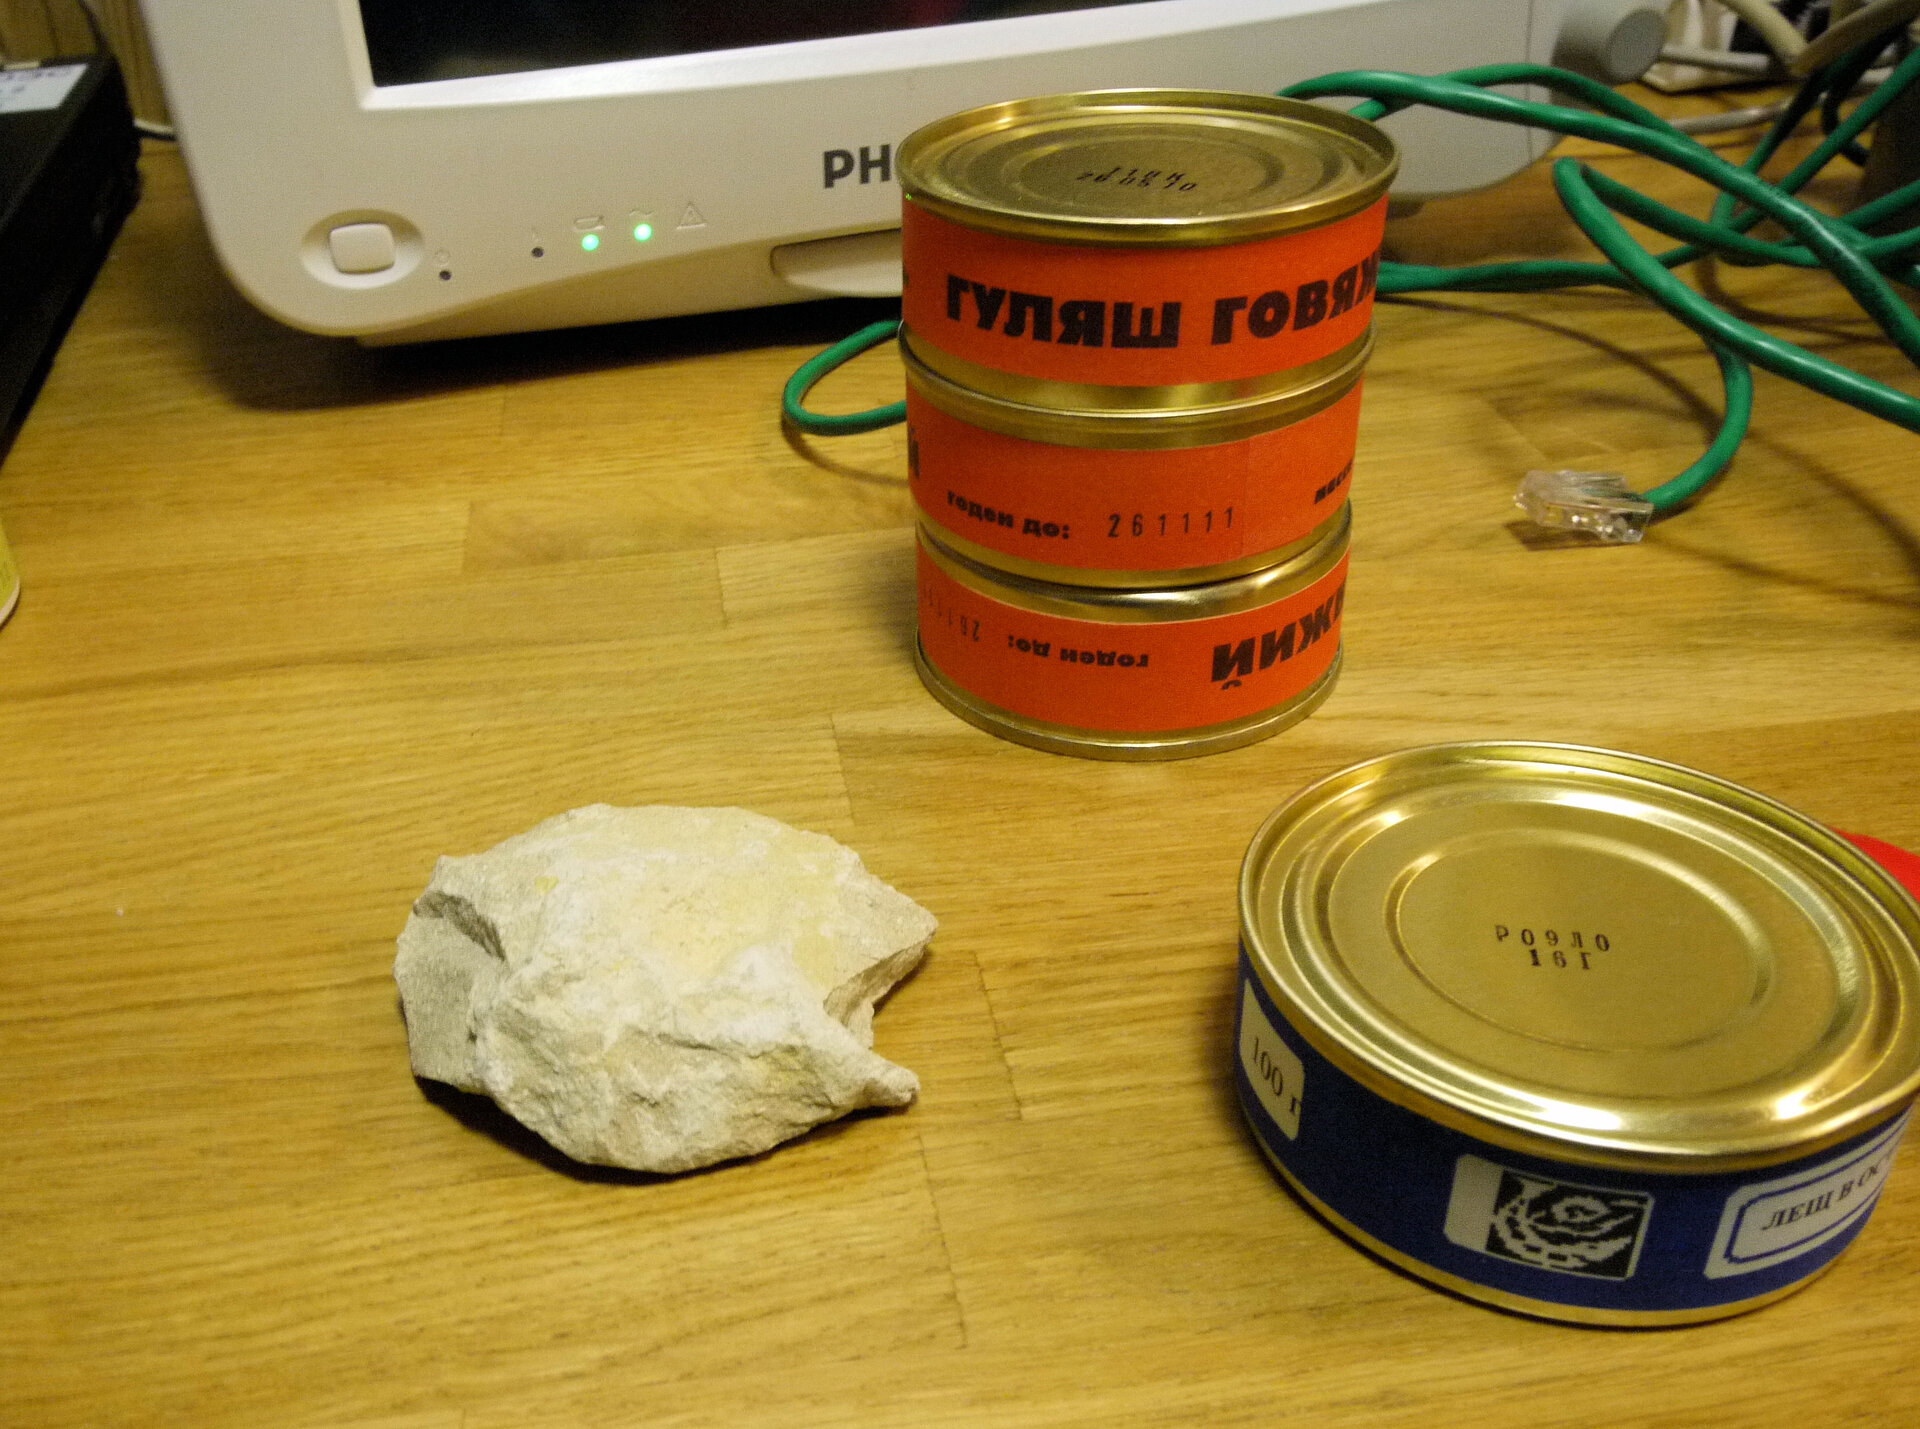 Piece of "Mars" and food cans